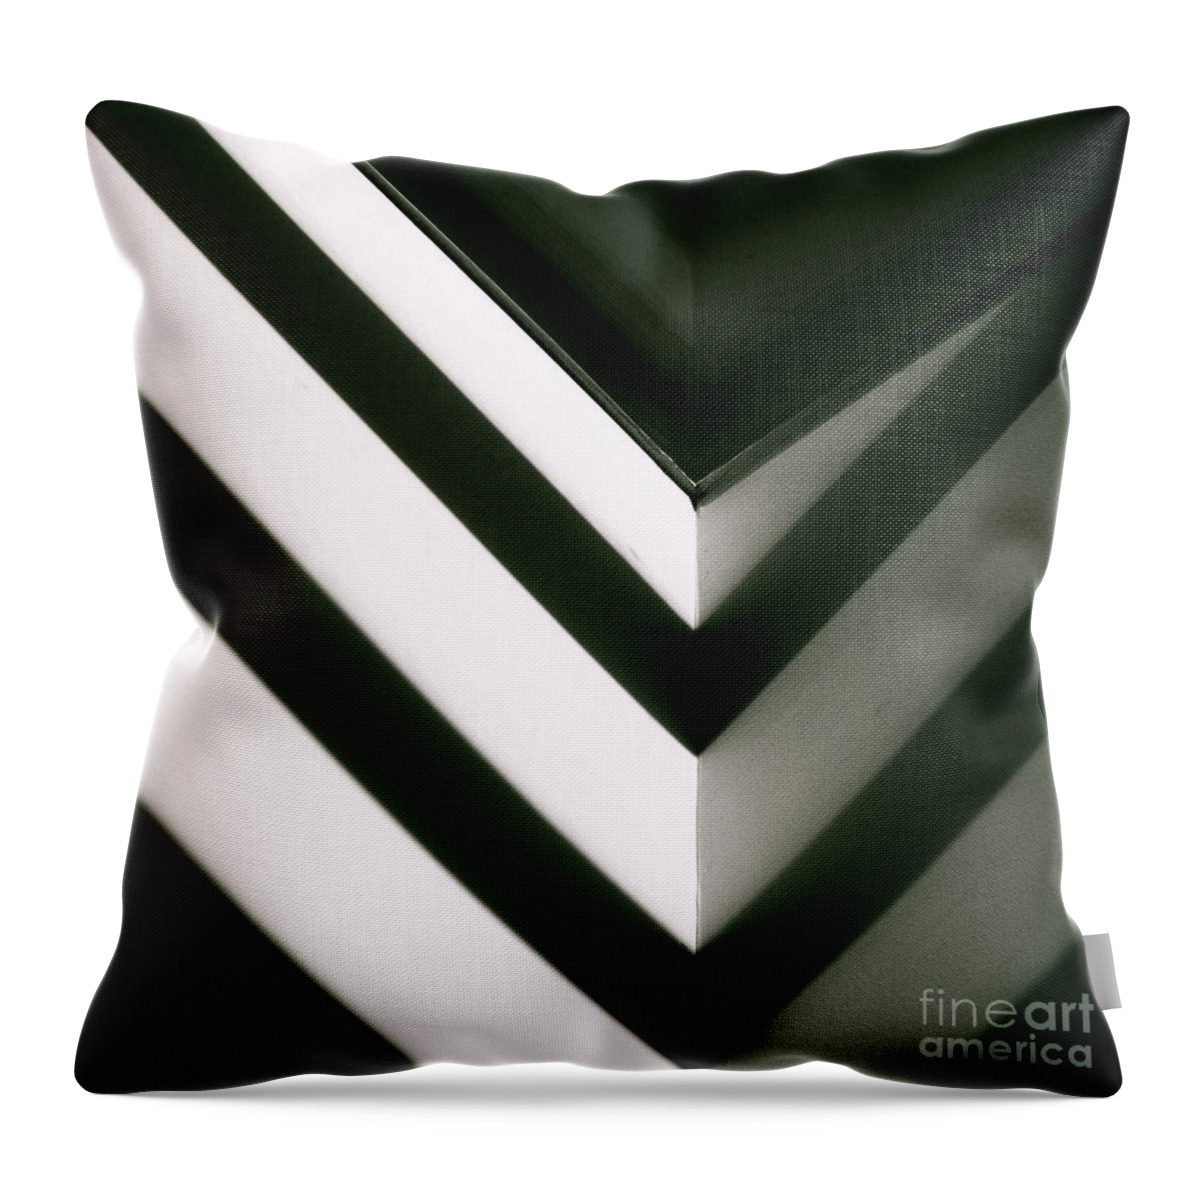 Cml Brown Throw Pillow featuring the photograph In Or Out by CML Brown